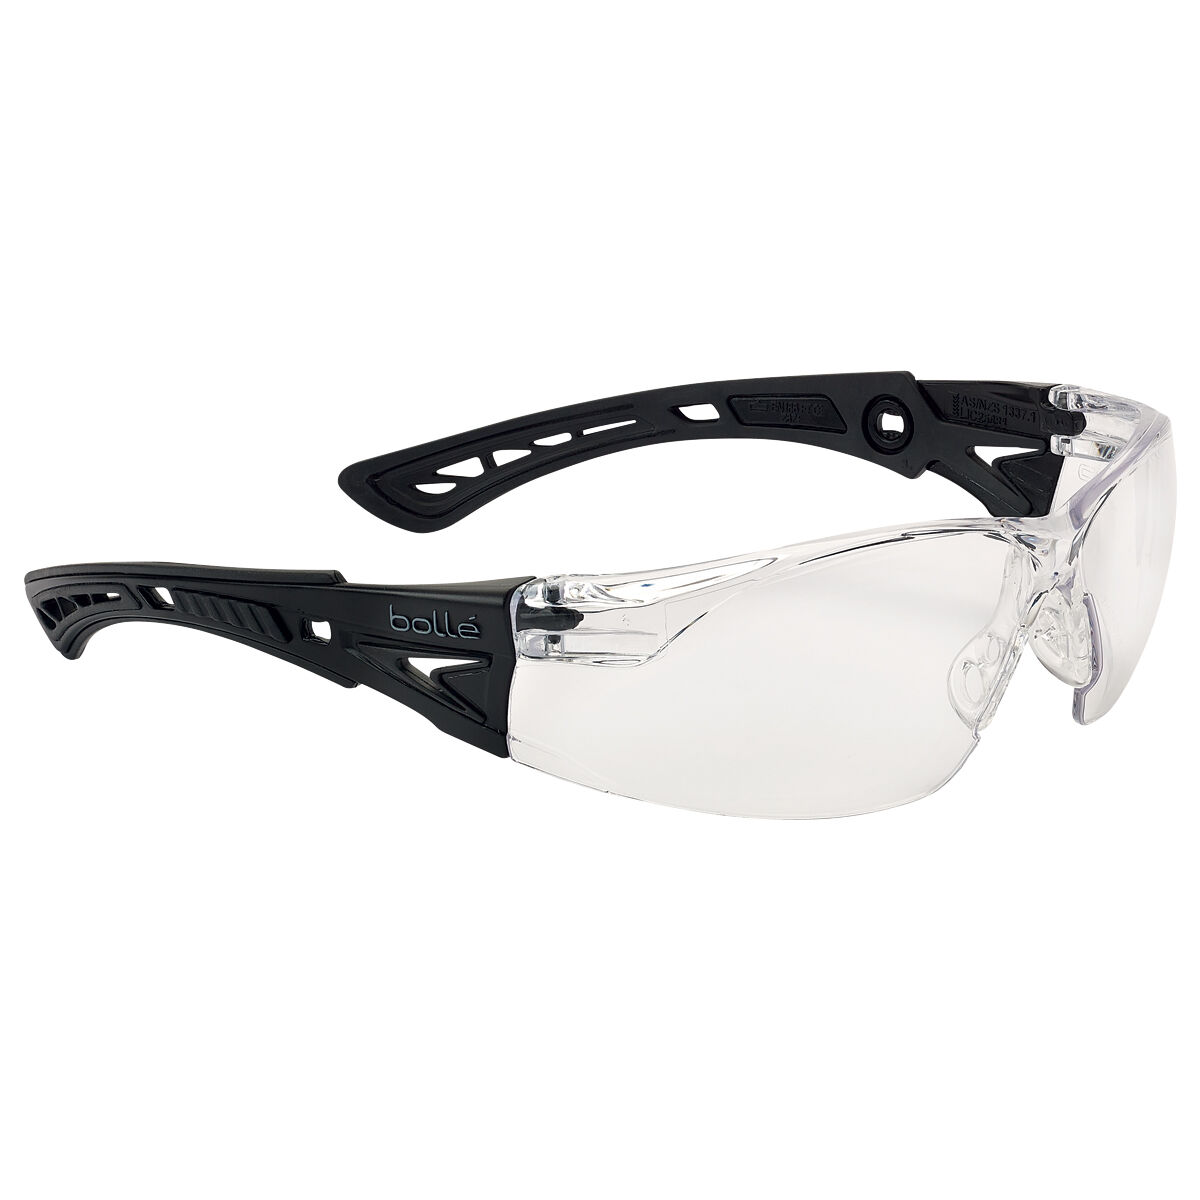 RUSH+ With bag Bolle Bolle black frame safety sunglasses 